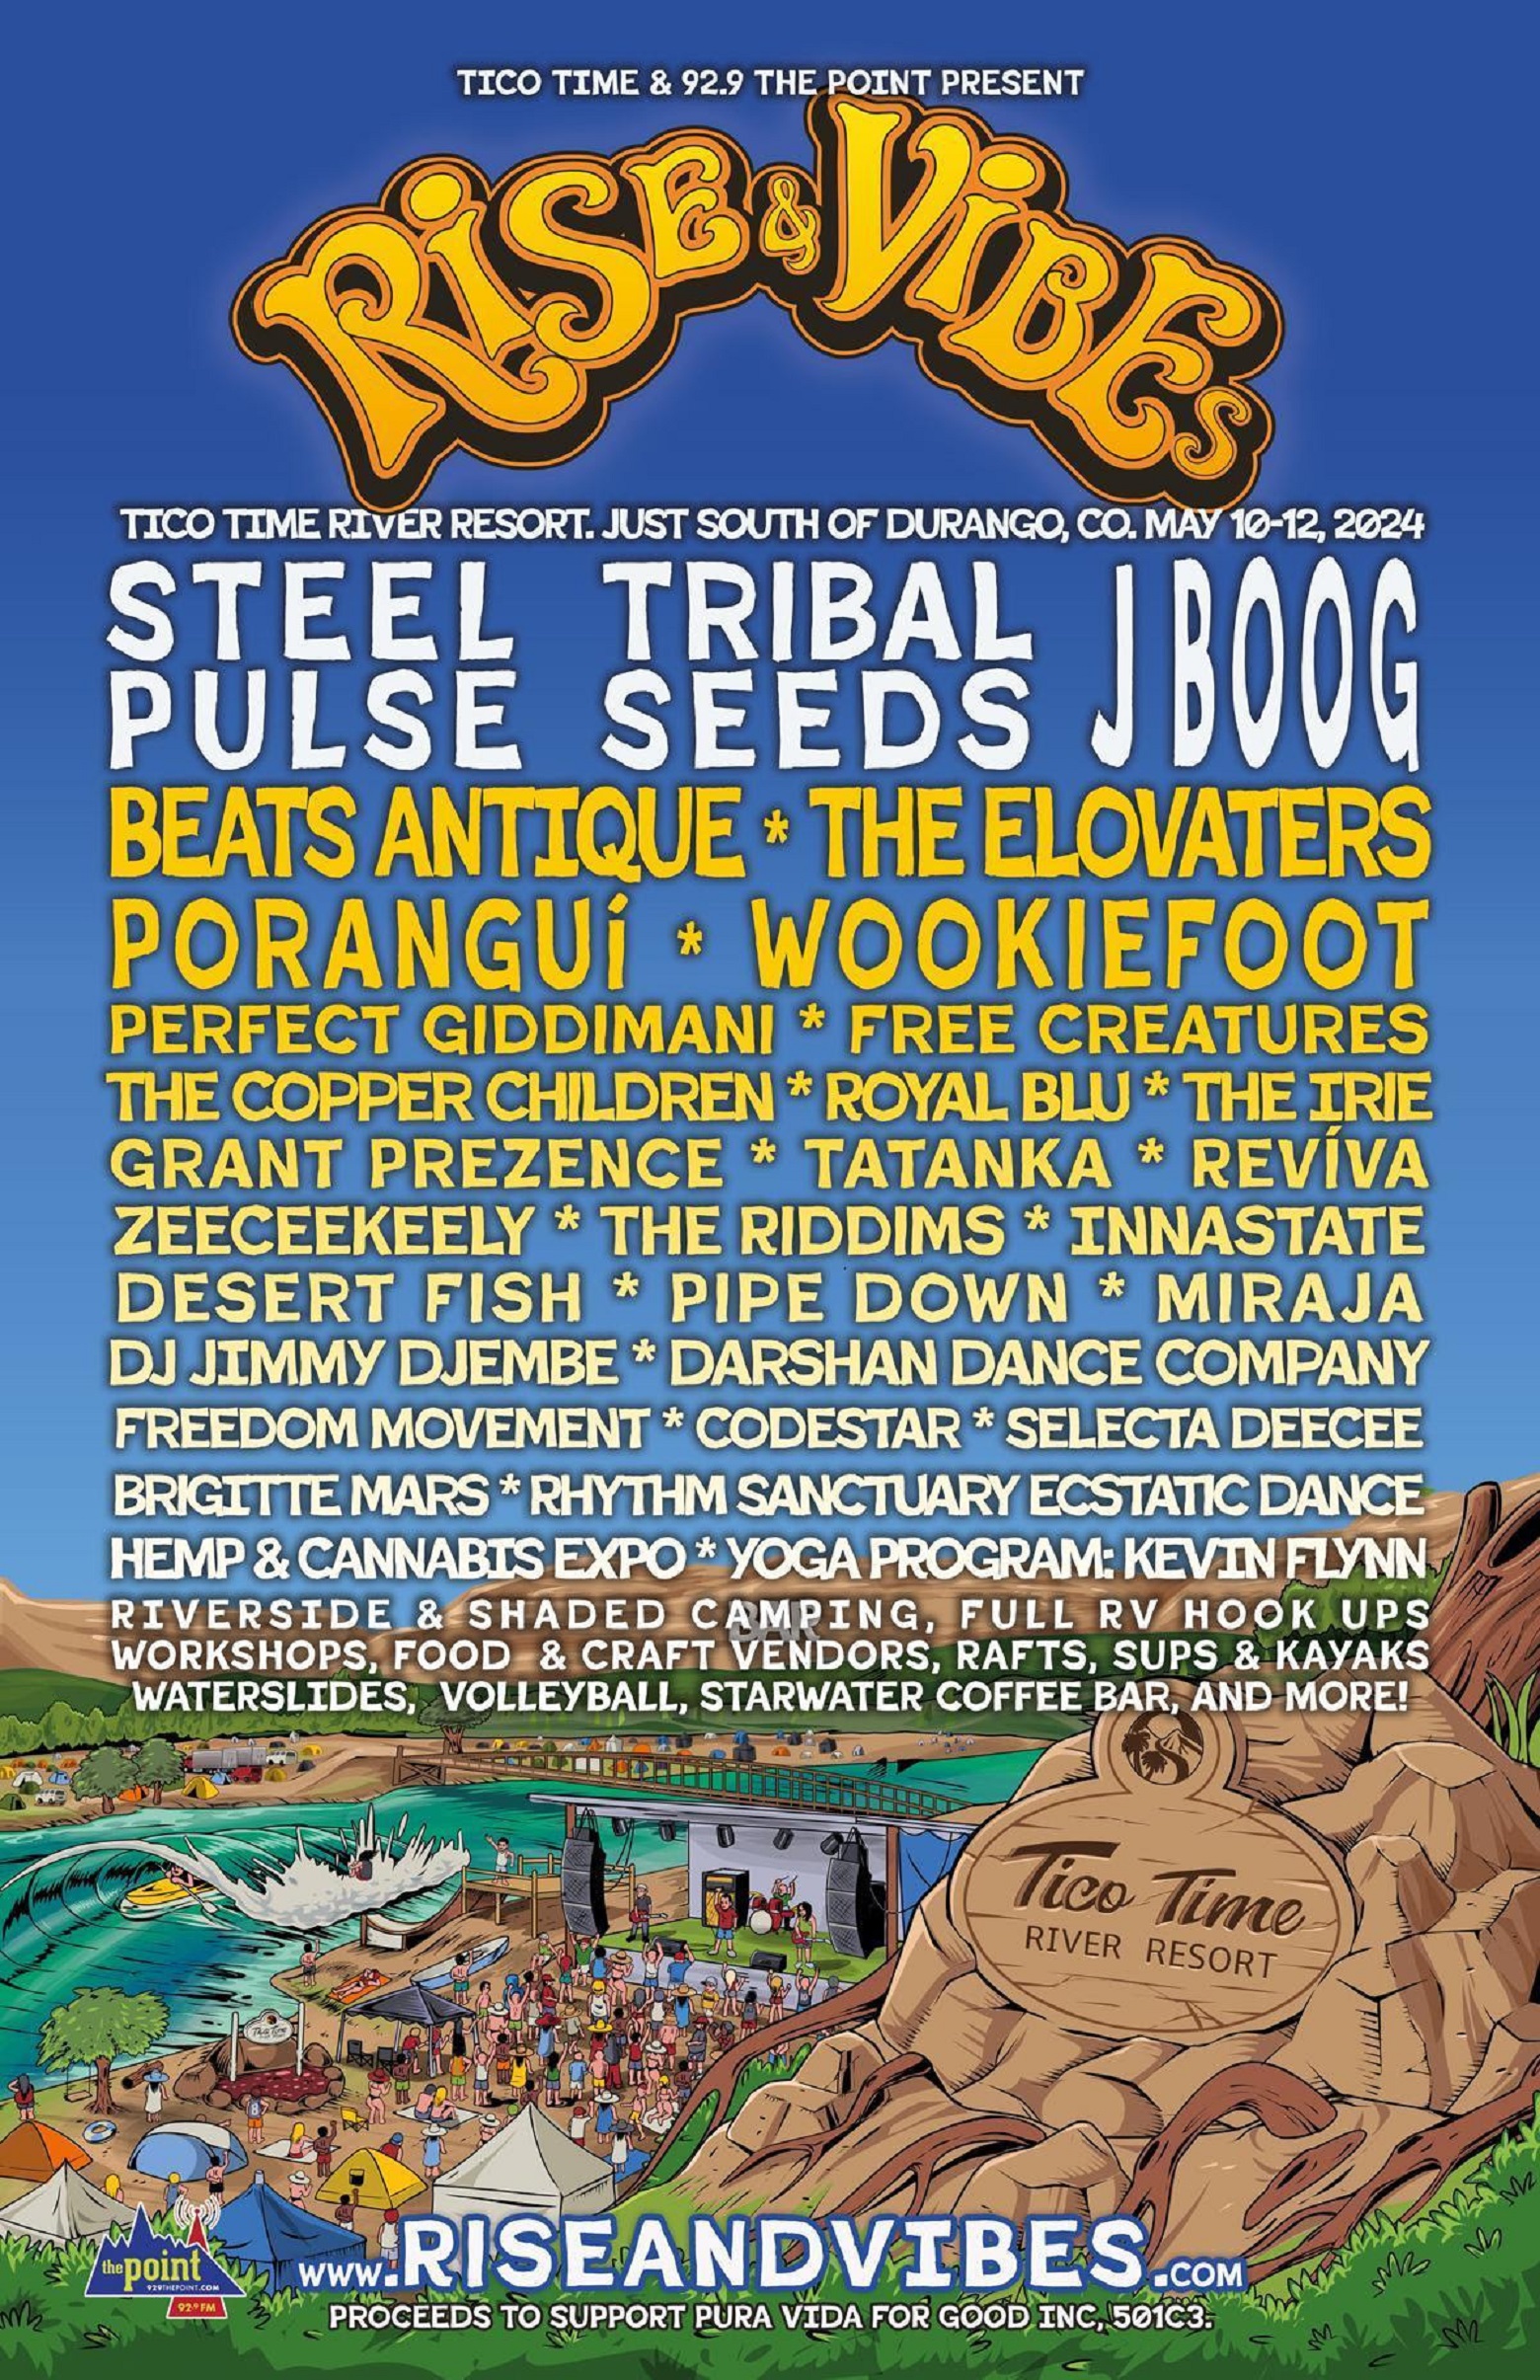 RISE & VIBES MUSIC FESTIVAL CELEBRATES IT’S 4TH ANNUAL EVENT MAY 10-12, 2024